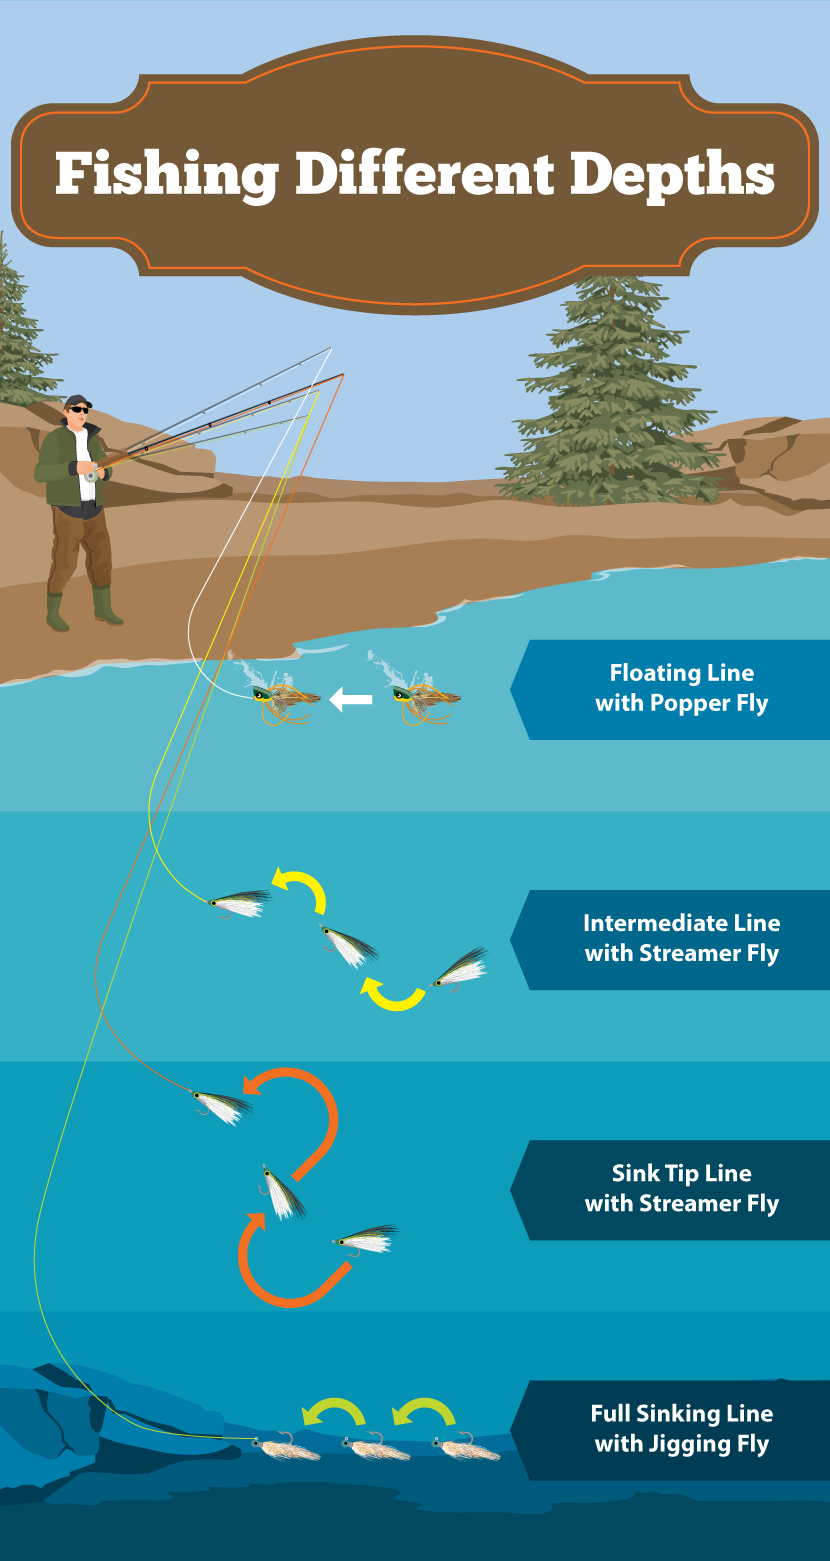 Fishing Different Depths - How to Catch Bass on a Fly Rod